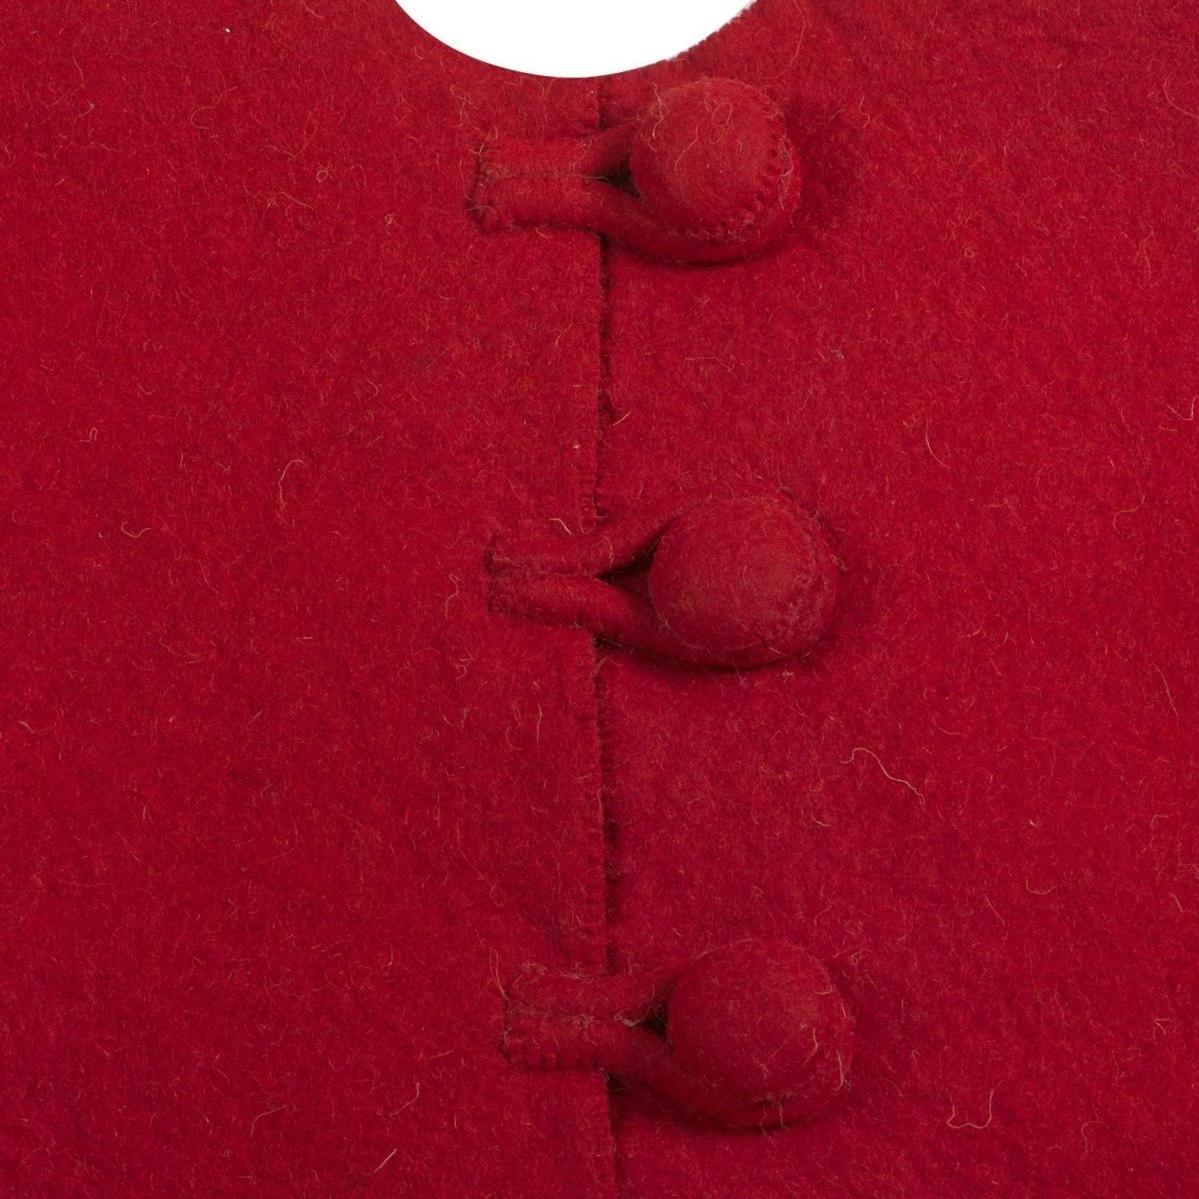 Shop For Red Felt Christmas Tree Skirt Pom Poms at Michelle's aDOORable Creations